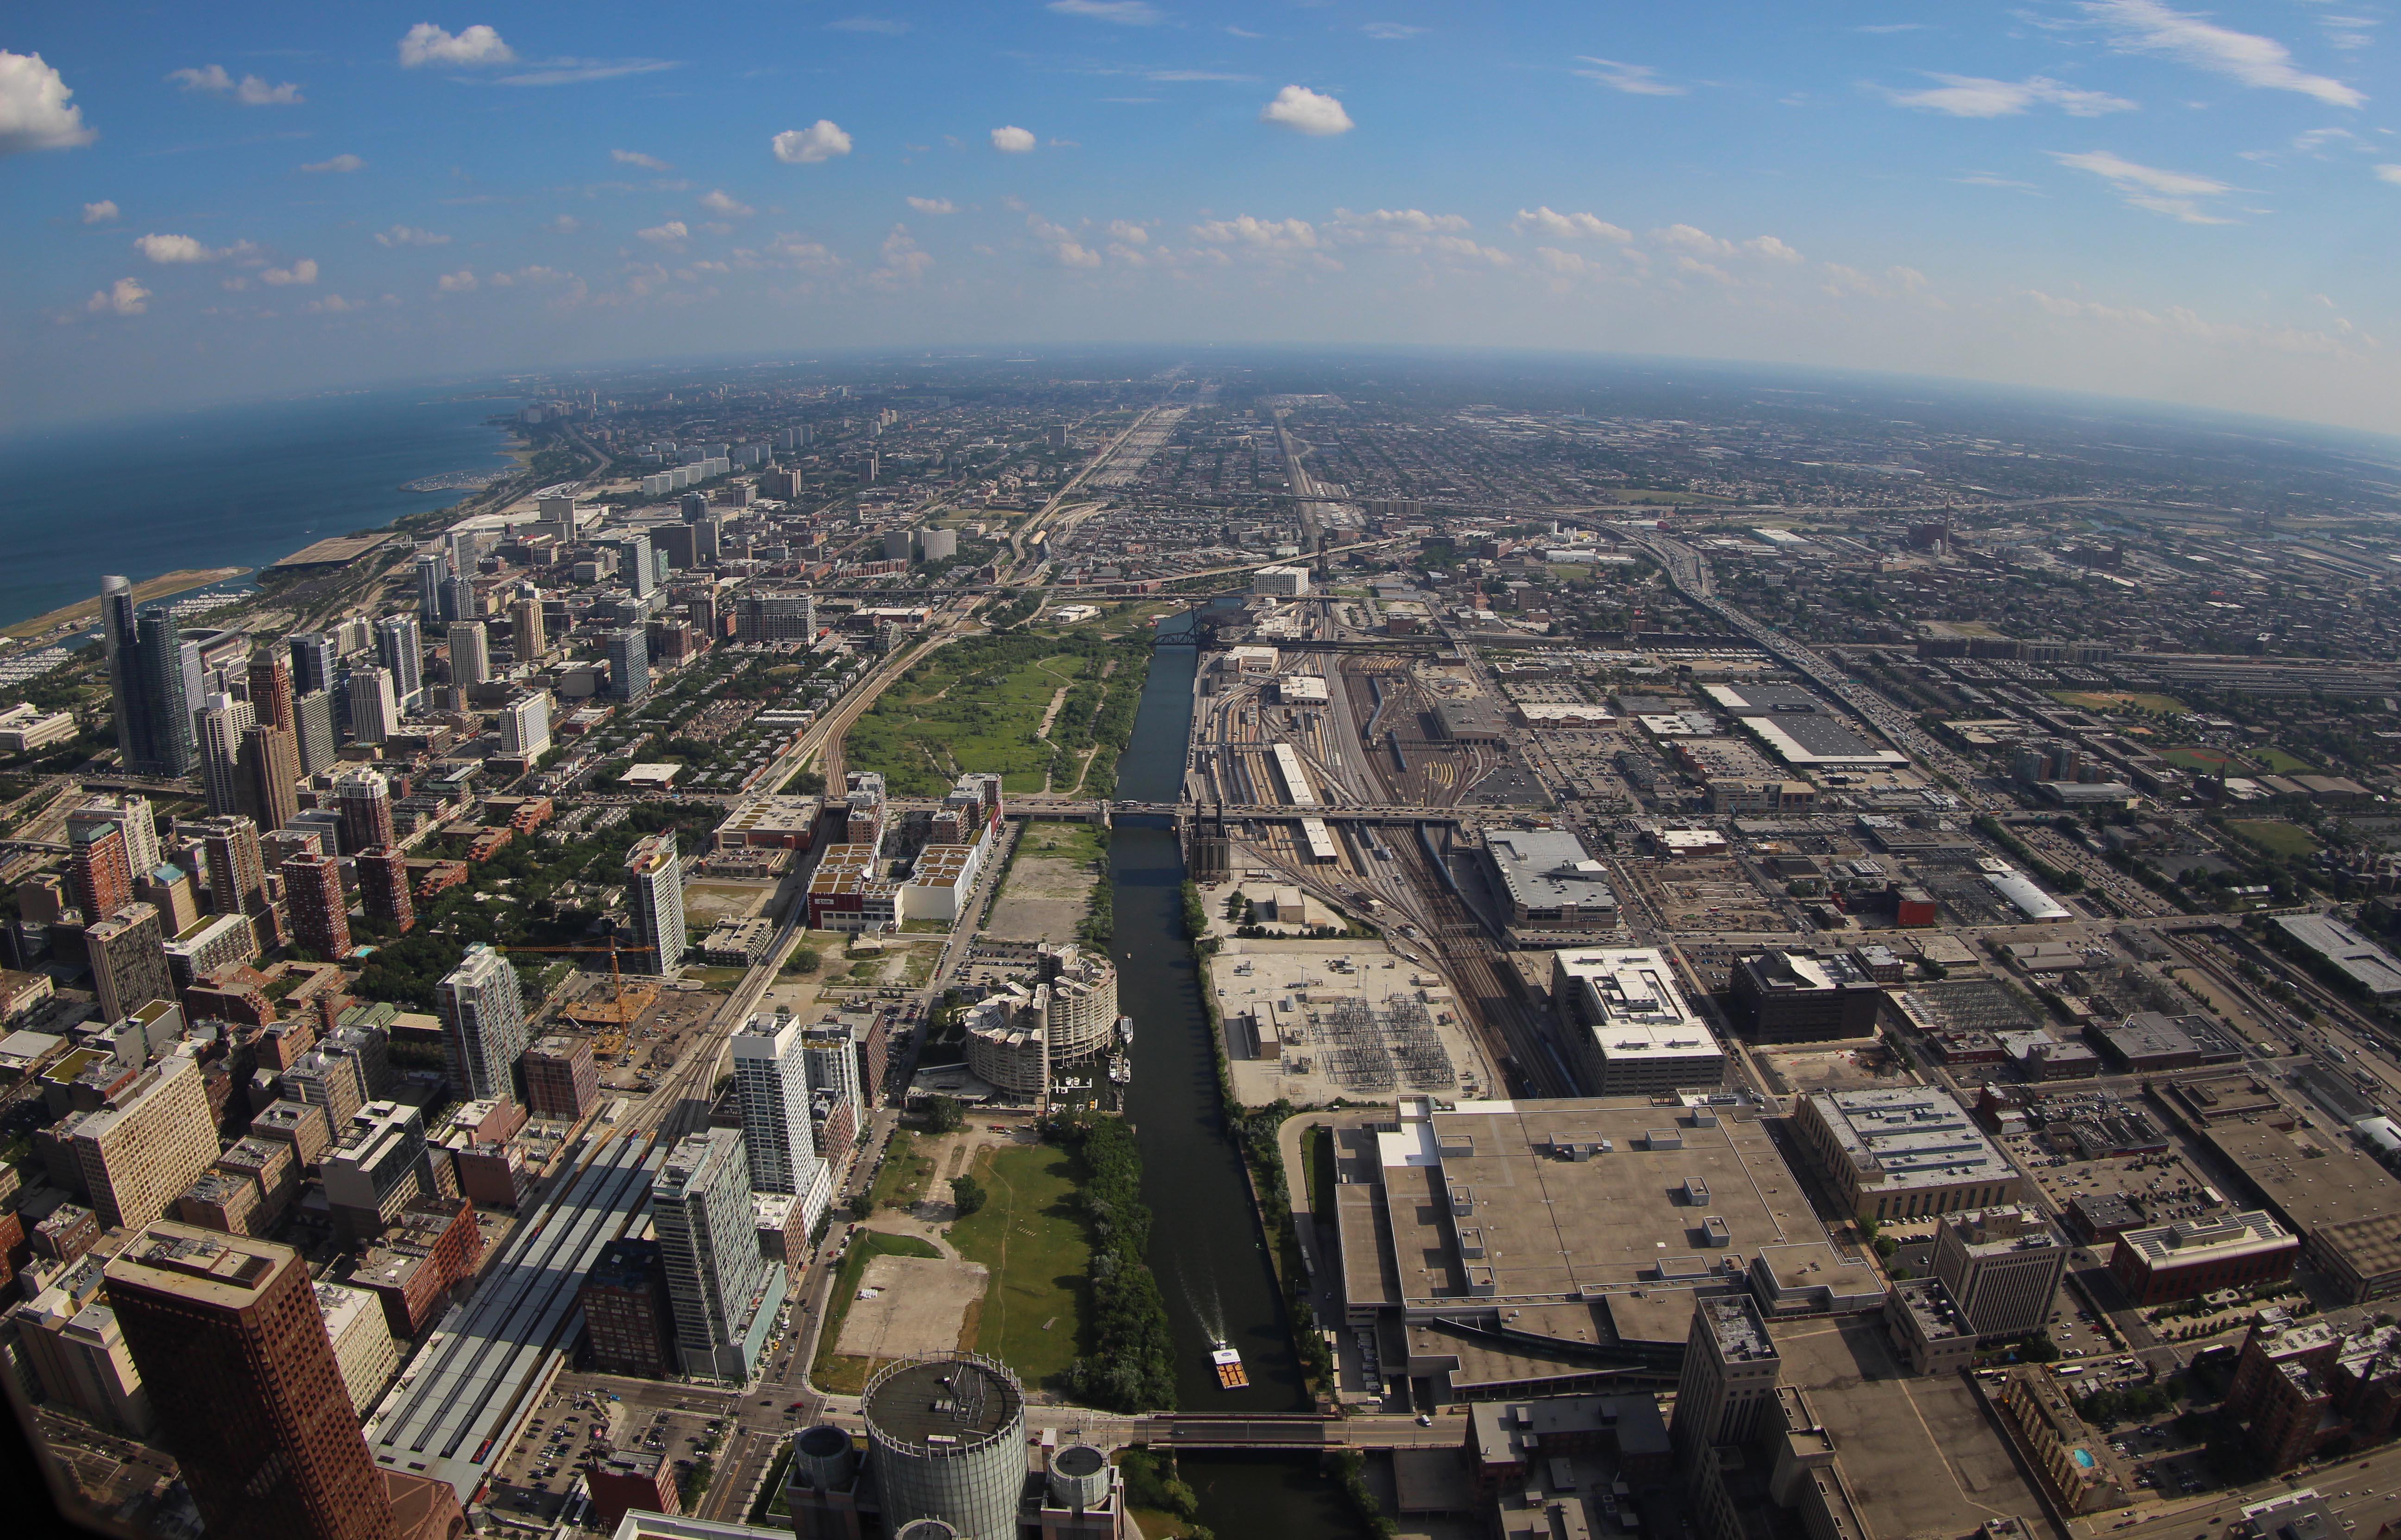 Enjoy views like these from the Willis Tower while in downward dog. (Roy Luck / Flickr) 